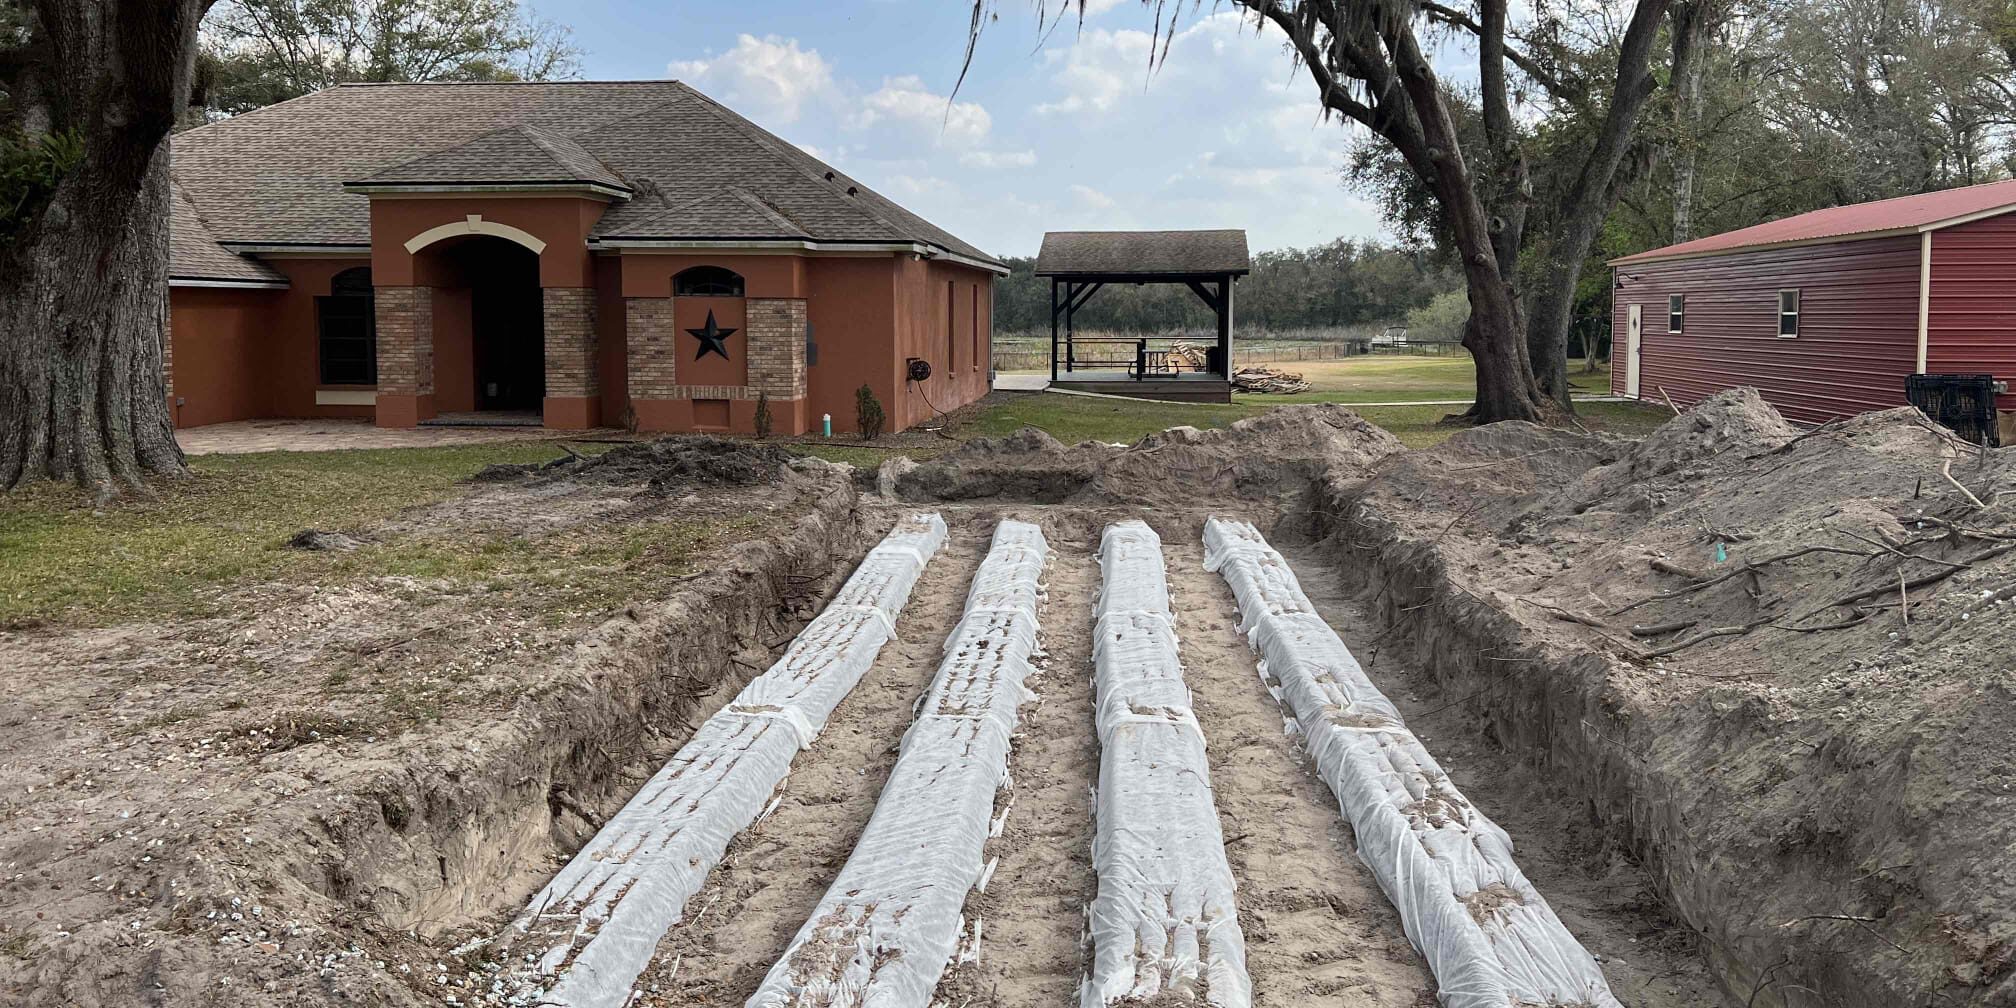 ACE performs a drainfield installation for a septic system in Florida.